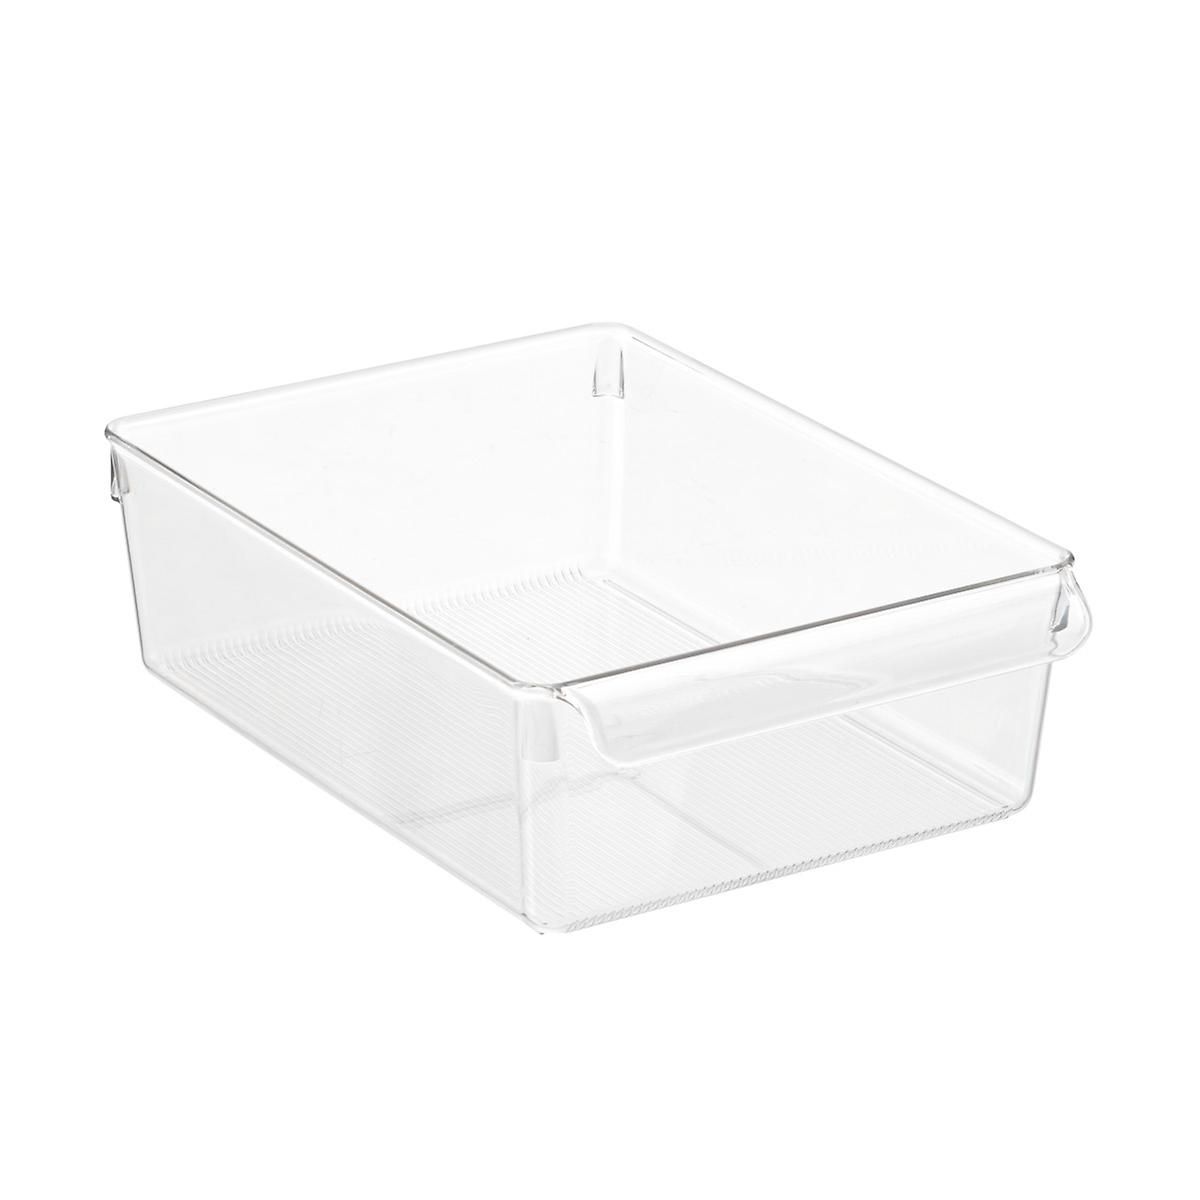 iDesign Linus Open Cabinet Organizers | The Container Store